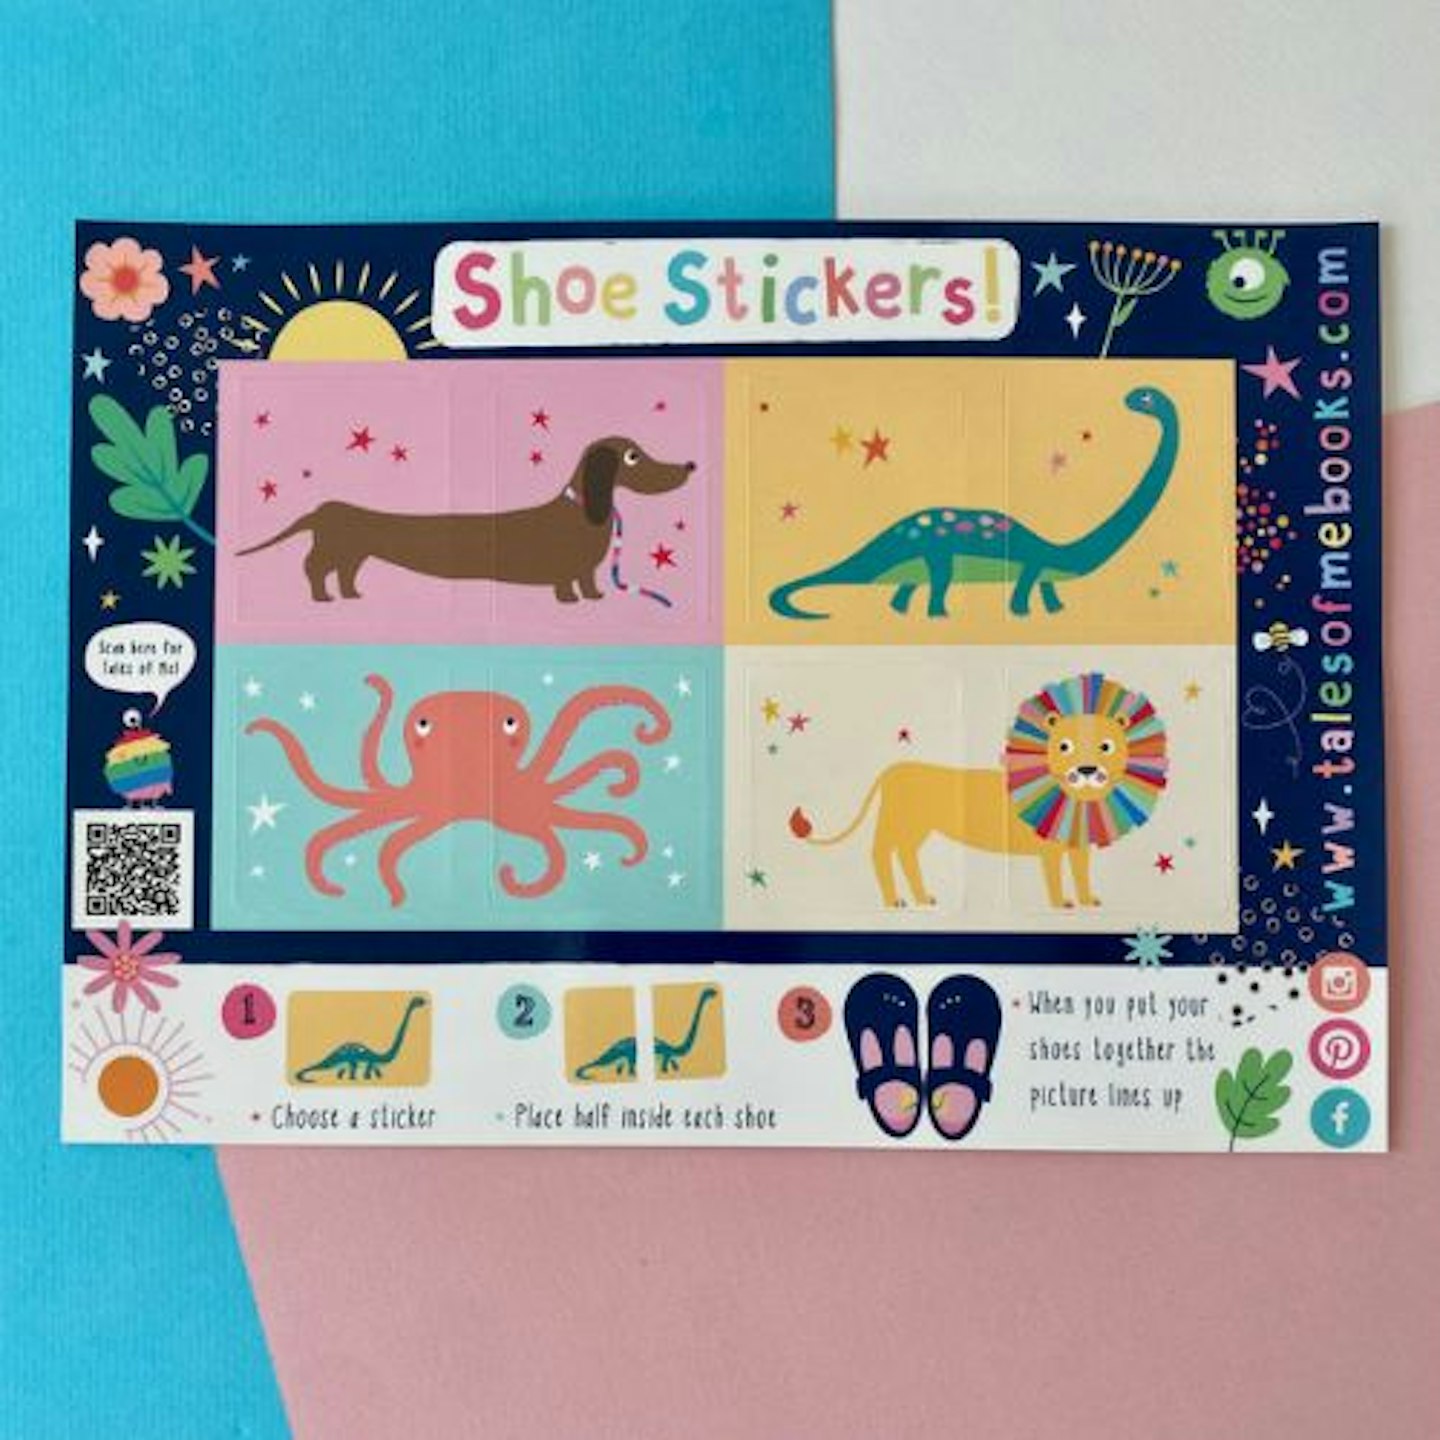 best back to school essentials shopping guide shoes sticker